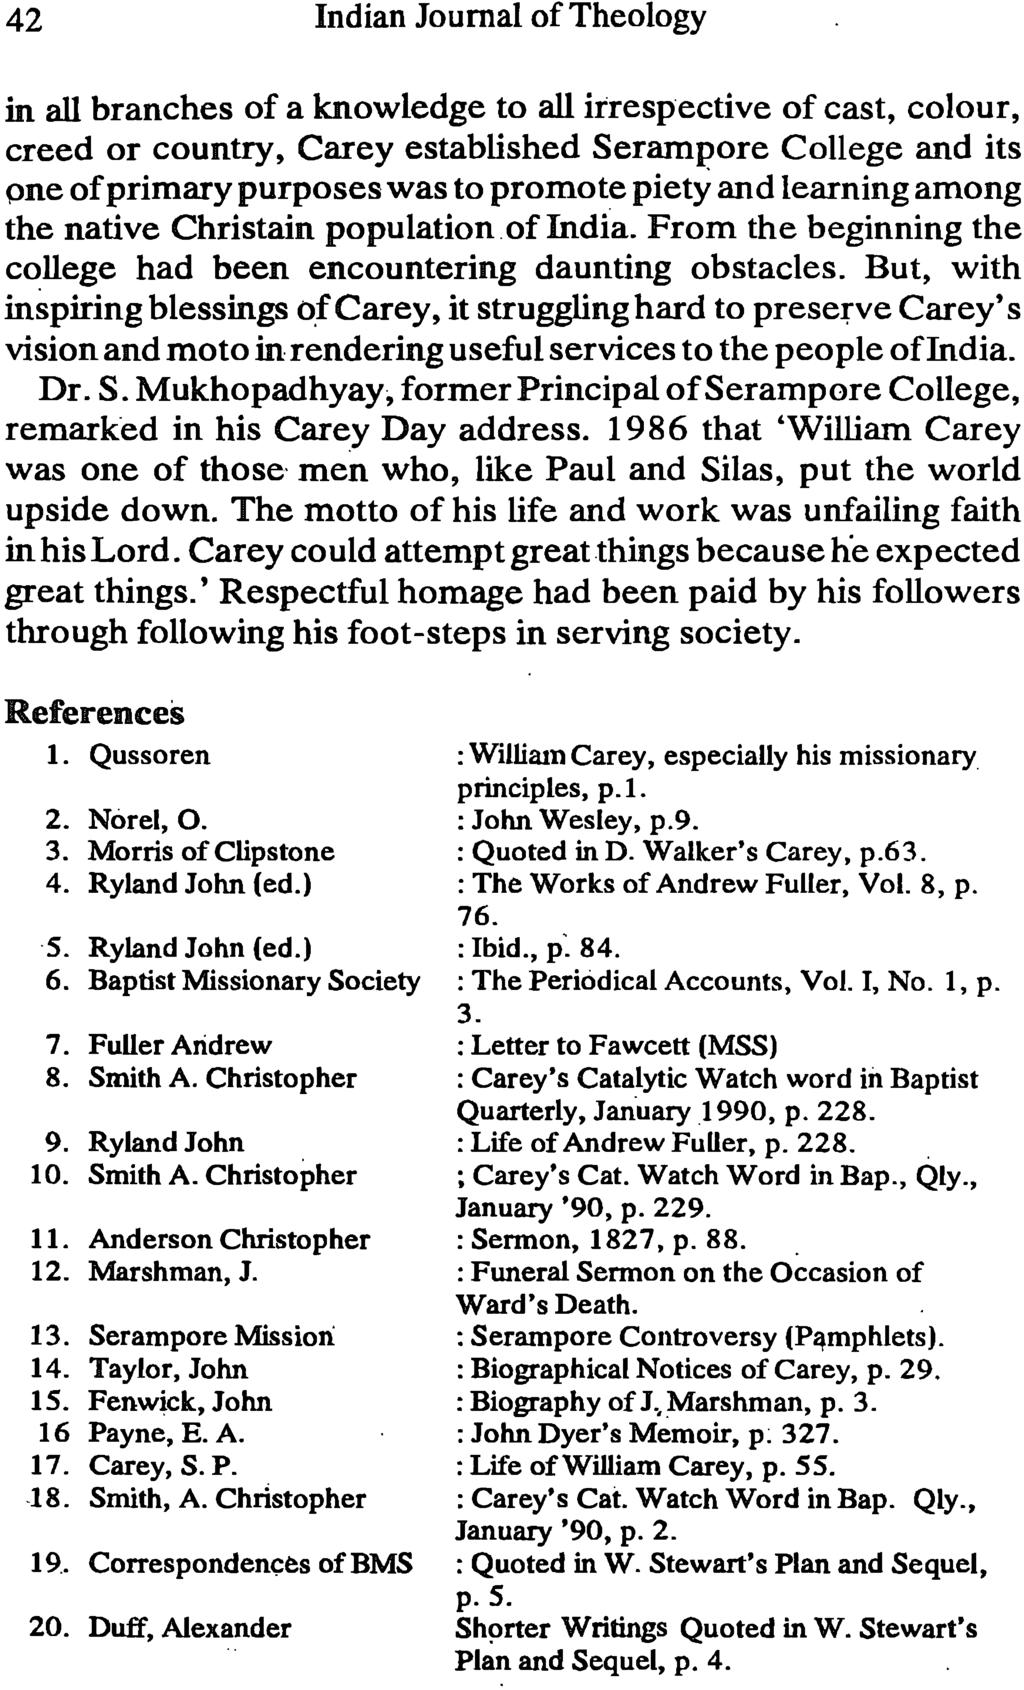 42 Indian Journal of Theology in all branches of a knowledge to all irrespective of cast, colour, creed or country, Carey established Serampore College and its pne of primary purposes was to promote